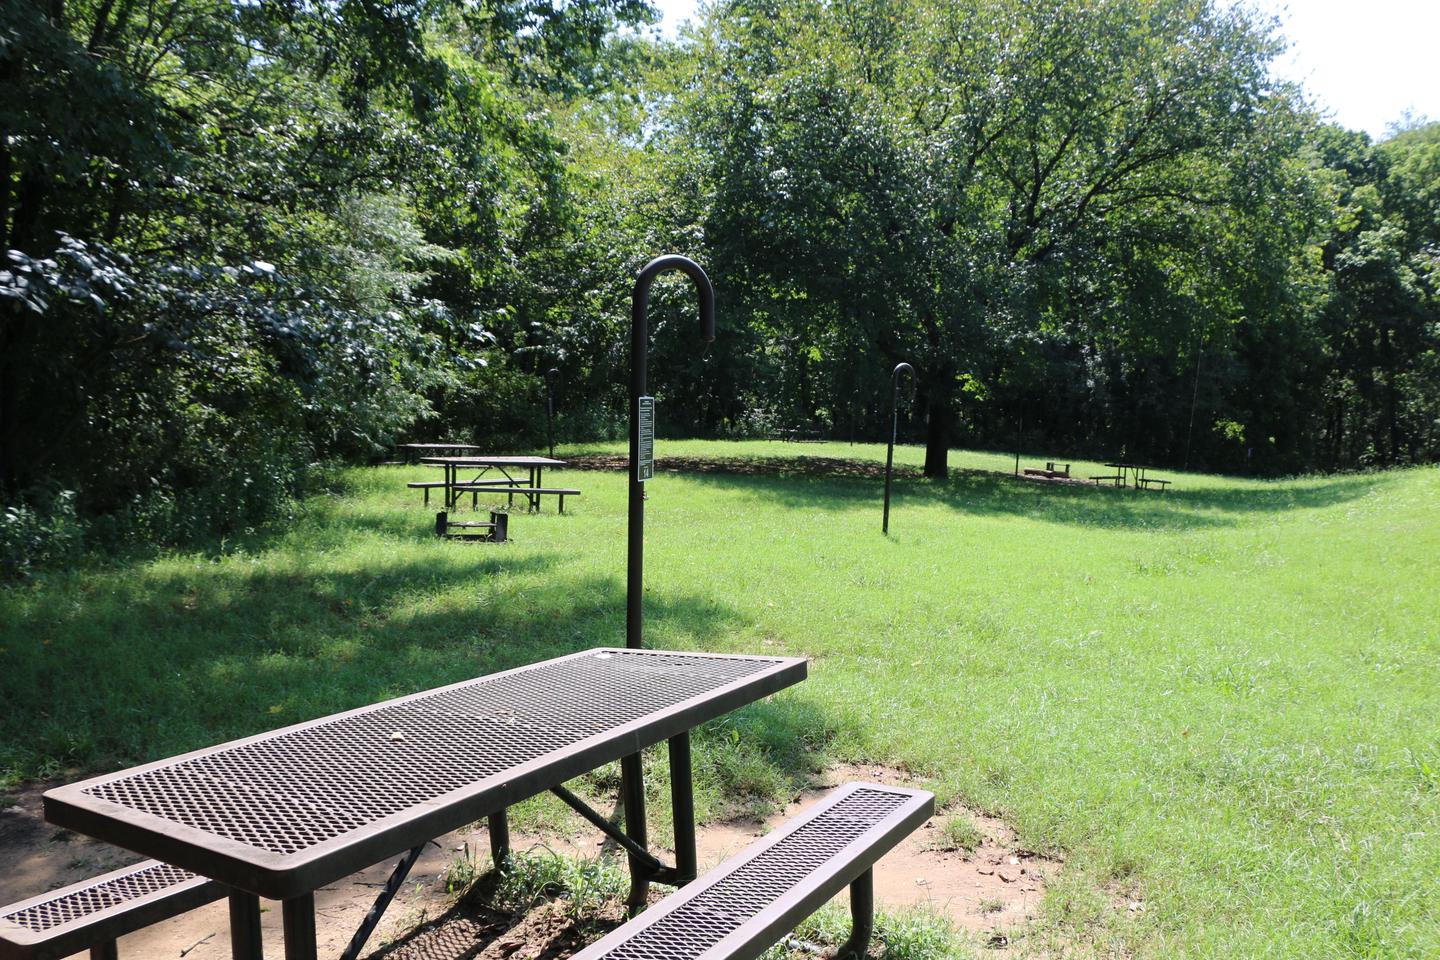 Campsites at Ozark CampgroundTent camping sites available near the Buffalo River access point at Ozark Campground.